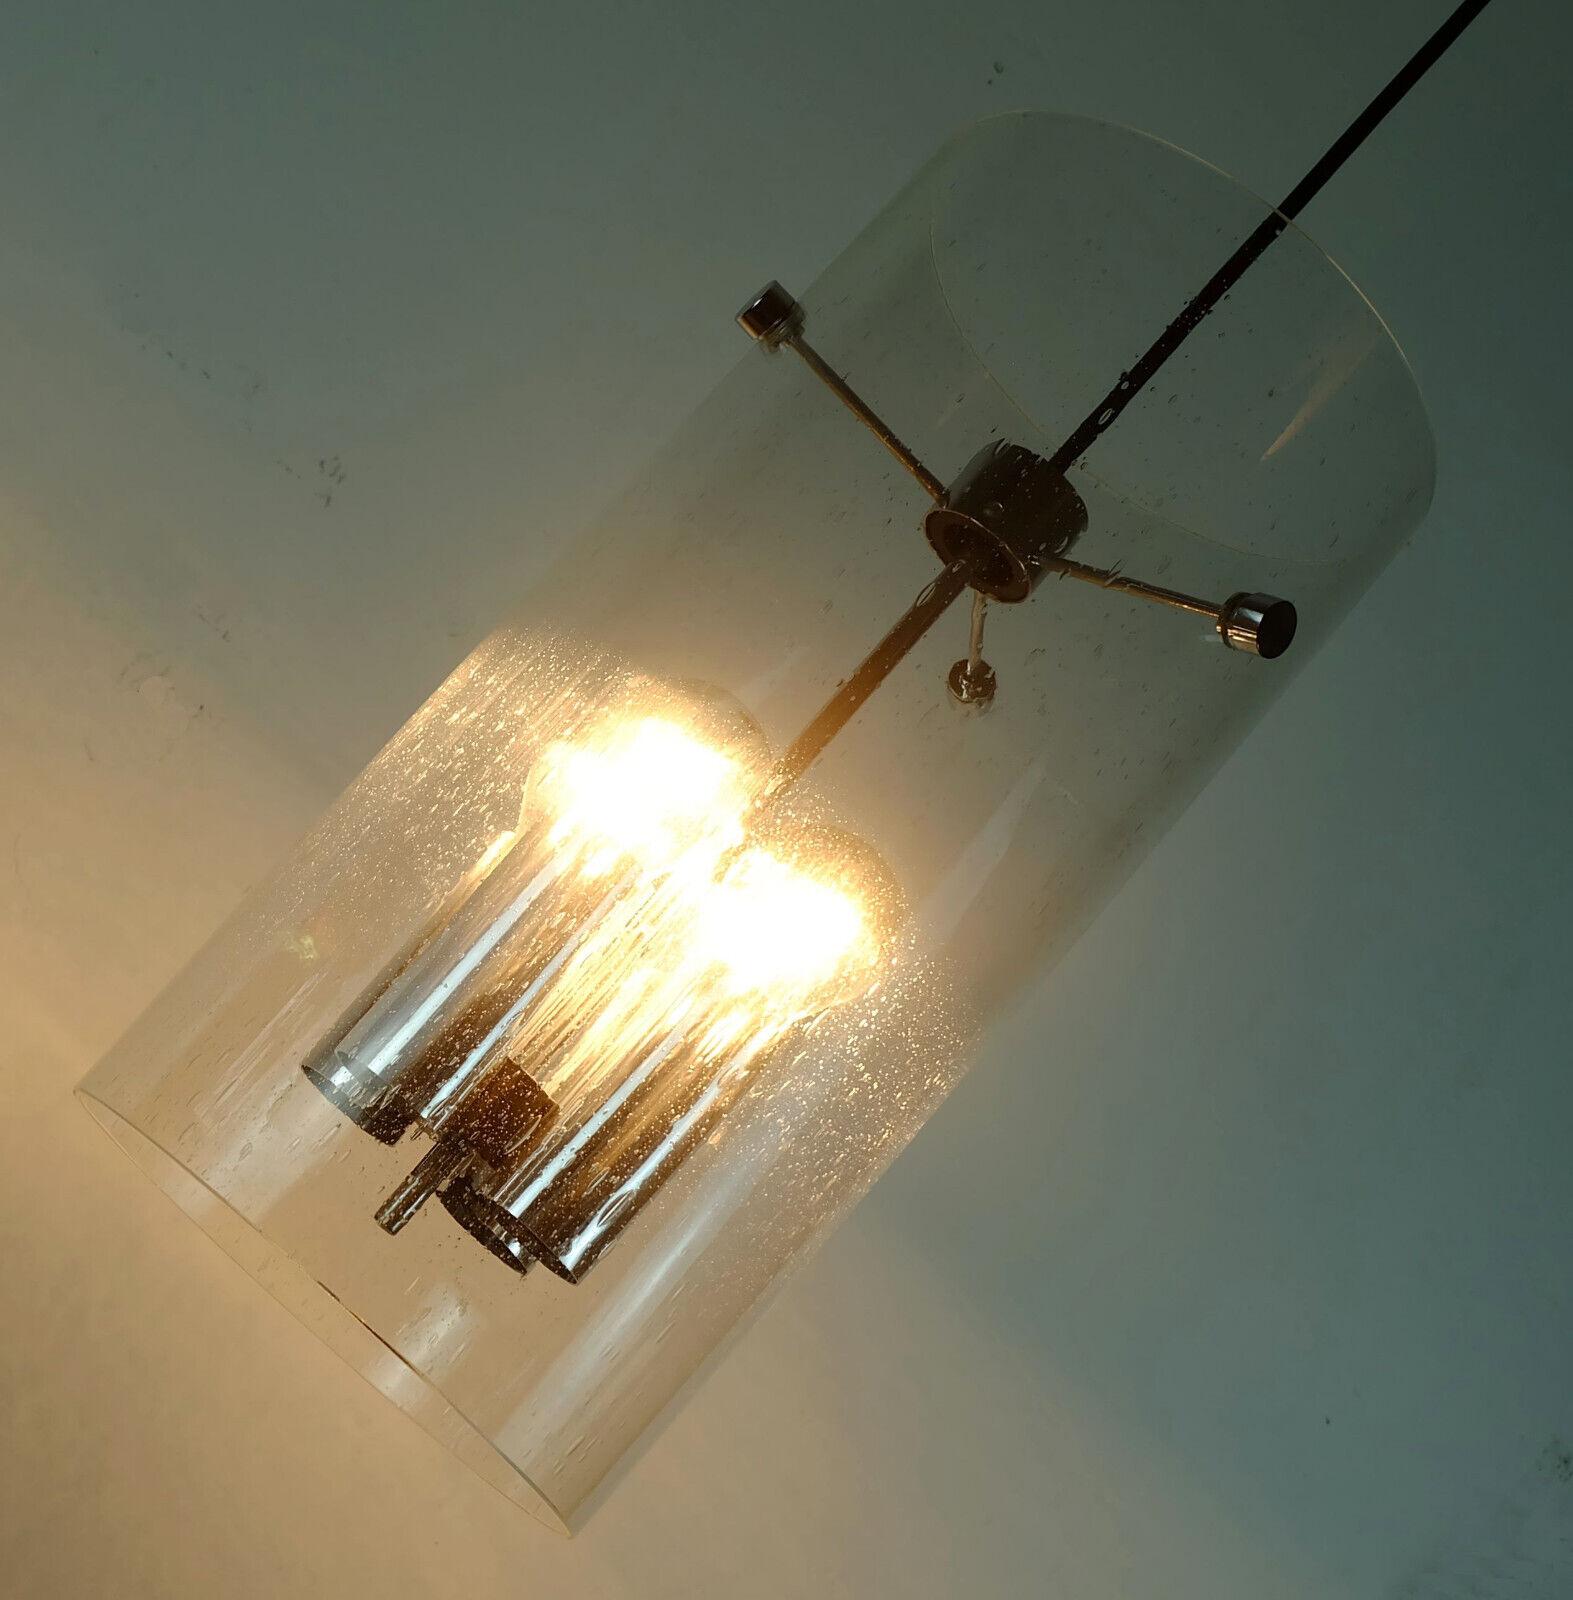 Midcentury pendant light manufactured in the 1970s by Glashuette Limburg. Model 4399. Transparent cylindrical glass shade with bubble structure, chrome details, black electric wire and canopy. Holds 4 E27 light bulbs.

Pre-used, good condition, no